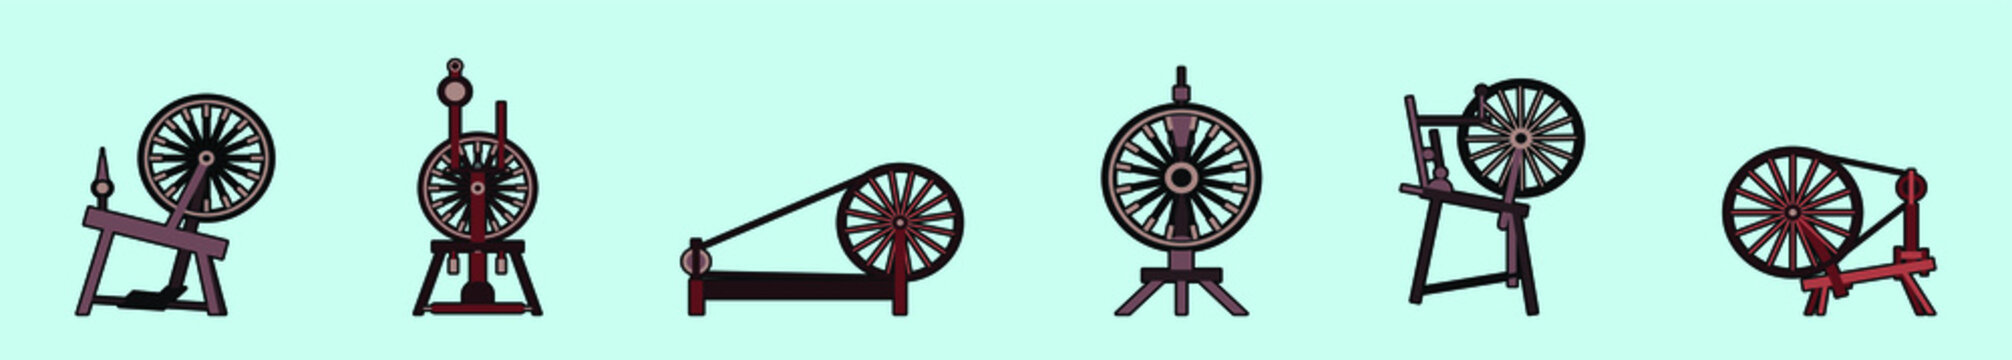 set of spinning wheels cartoon icon design template with various models. vector illustration